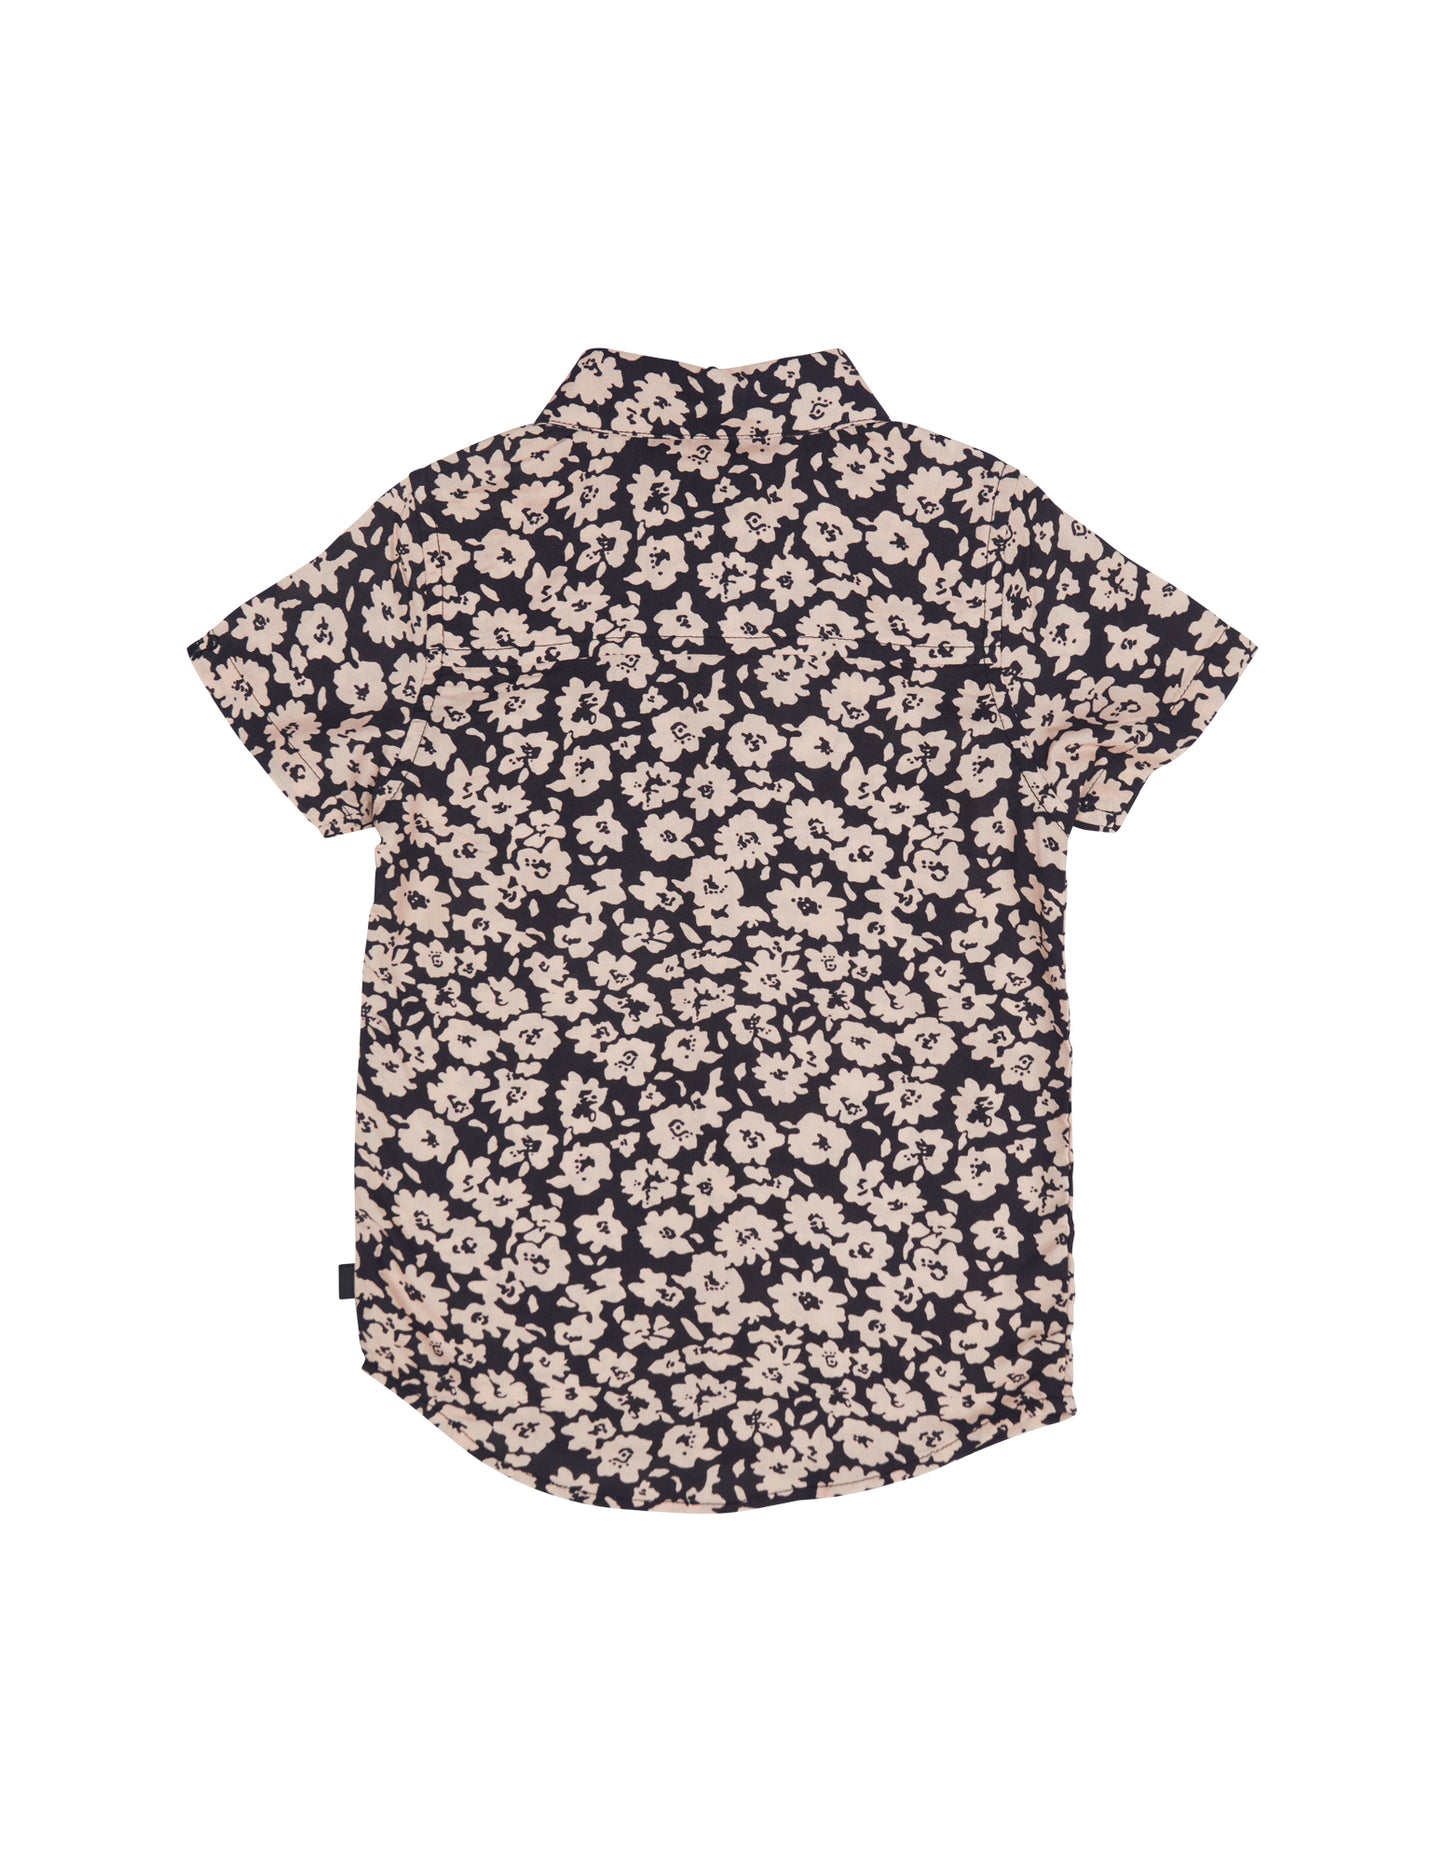 Coogee Shirt in Print - Lucky Last! (Size 6-12m)